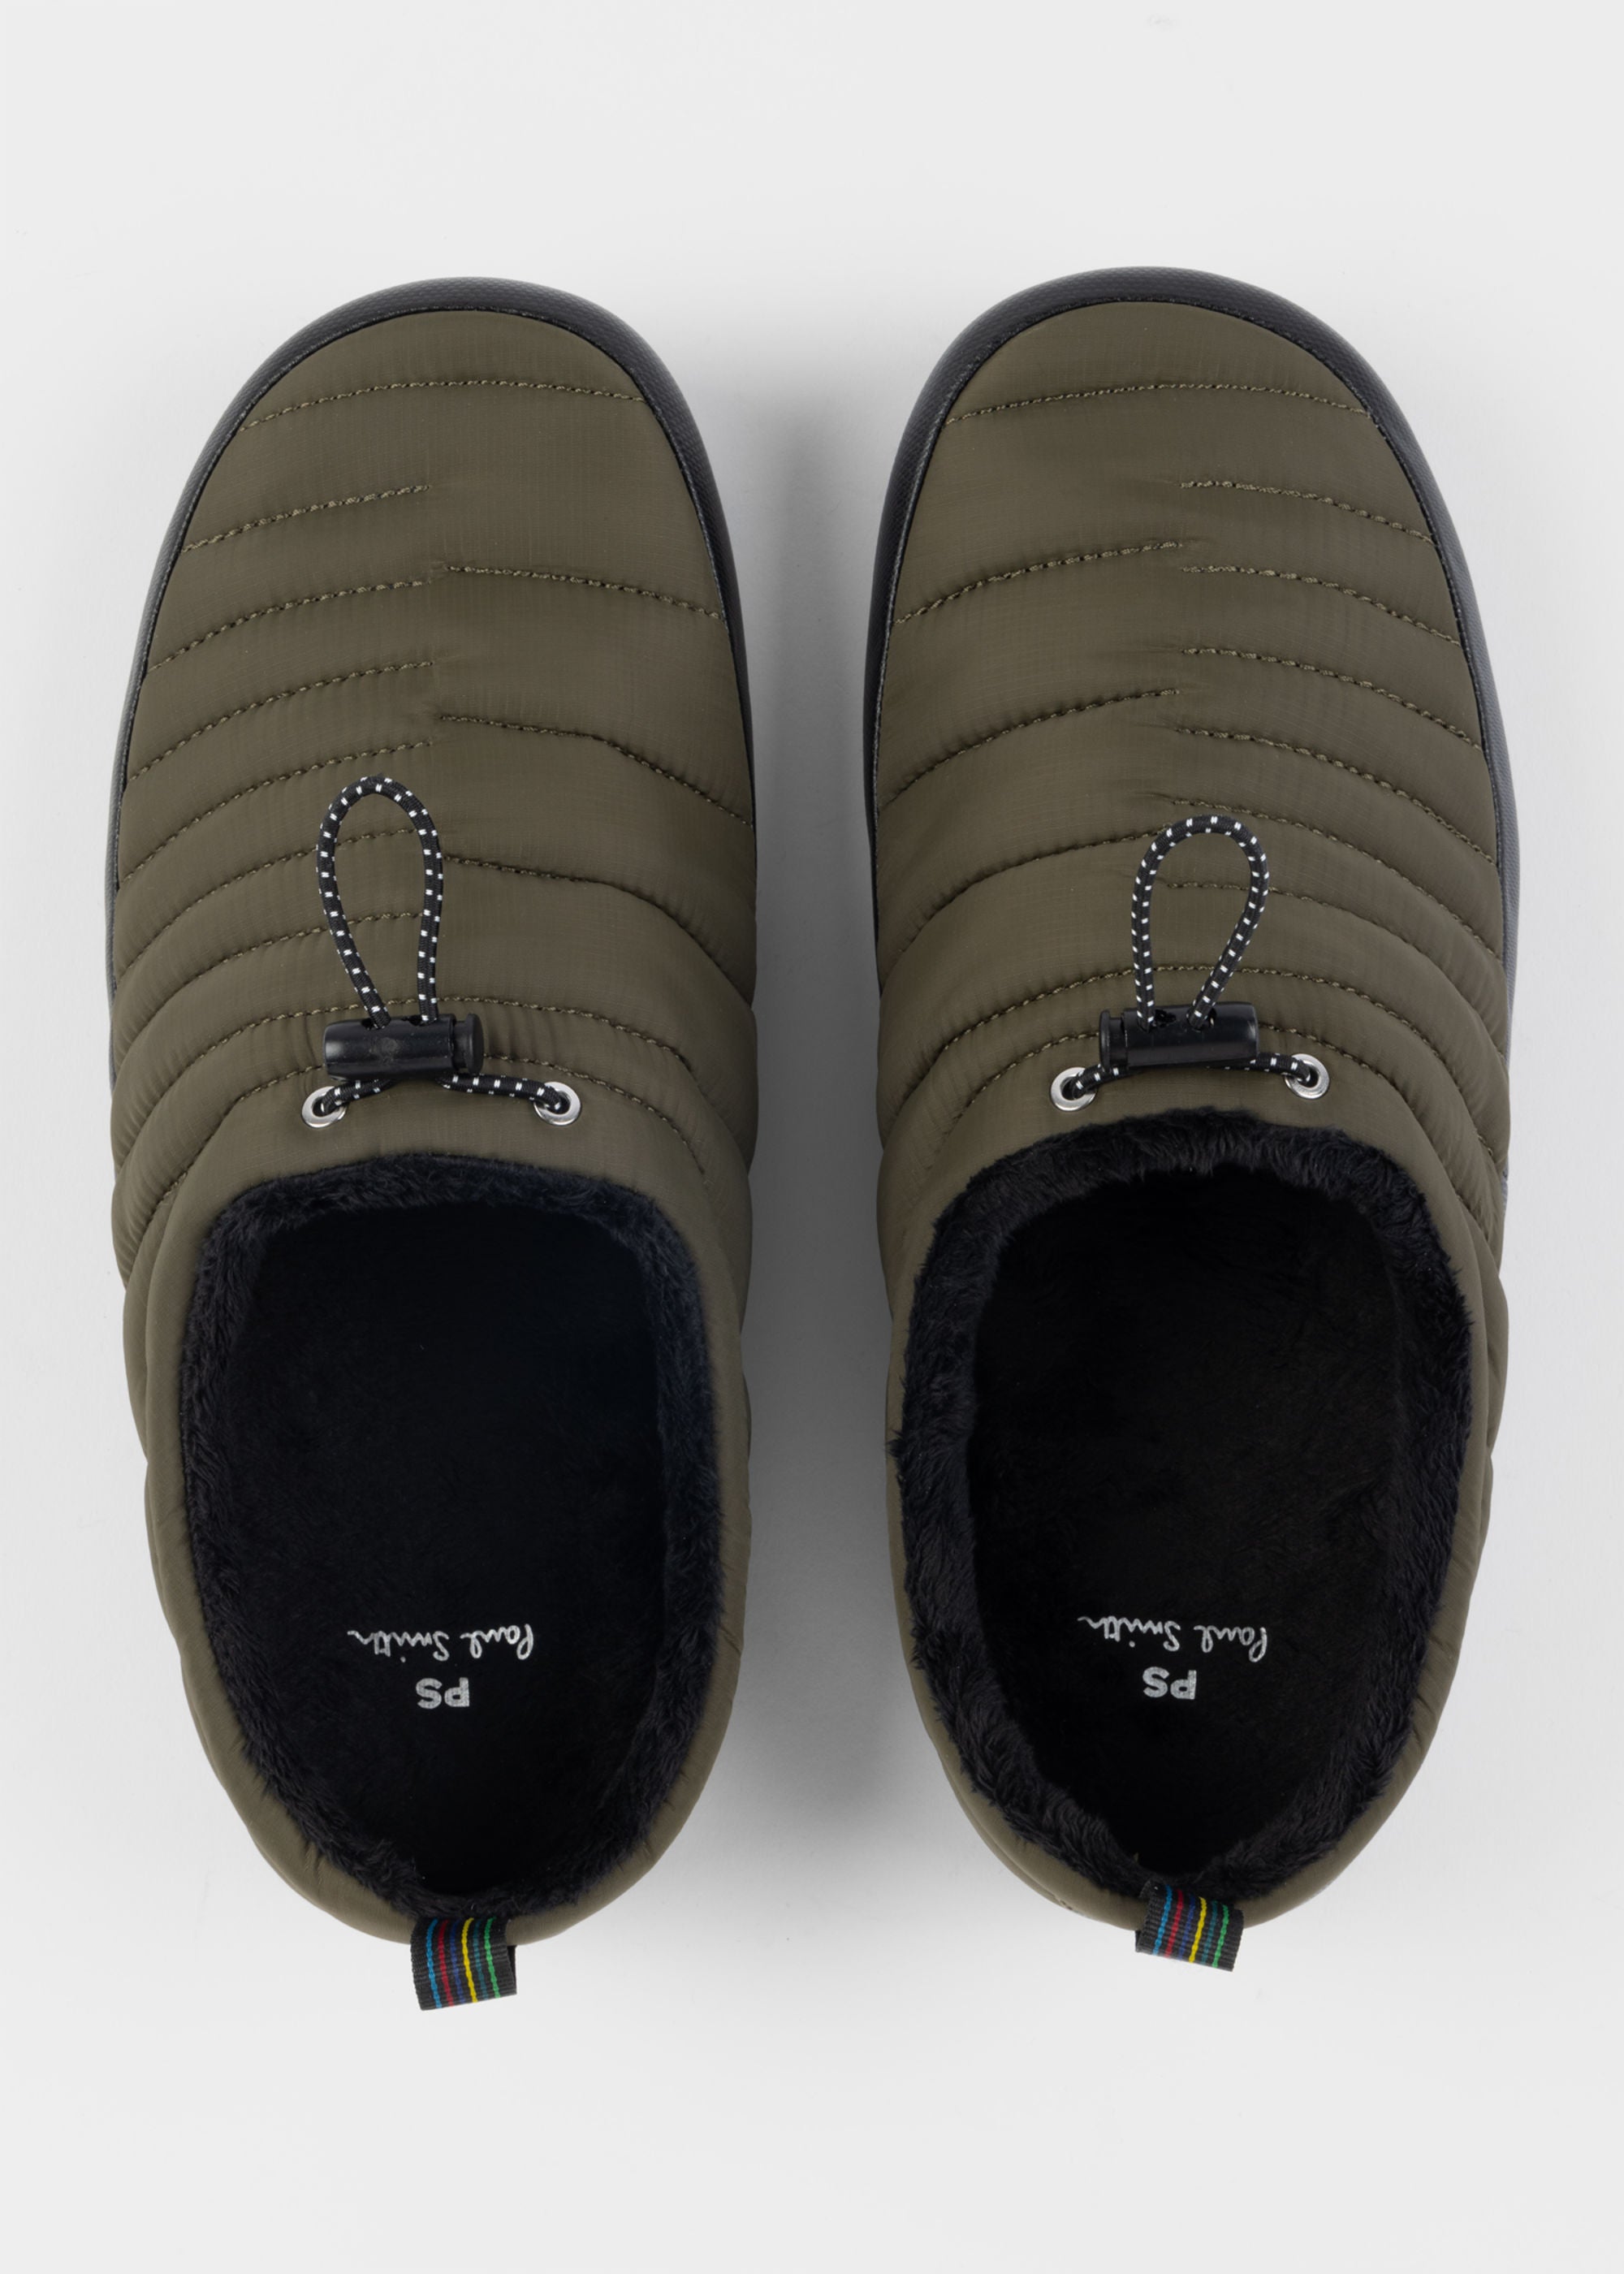 Paul Smith Noah Grained Leather Slippers Black